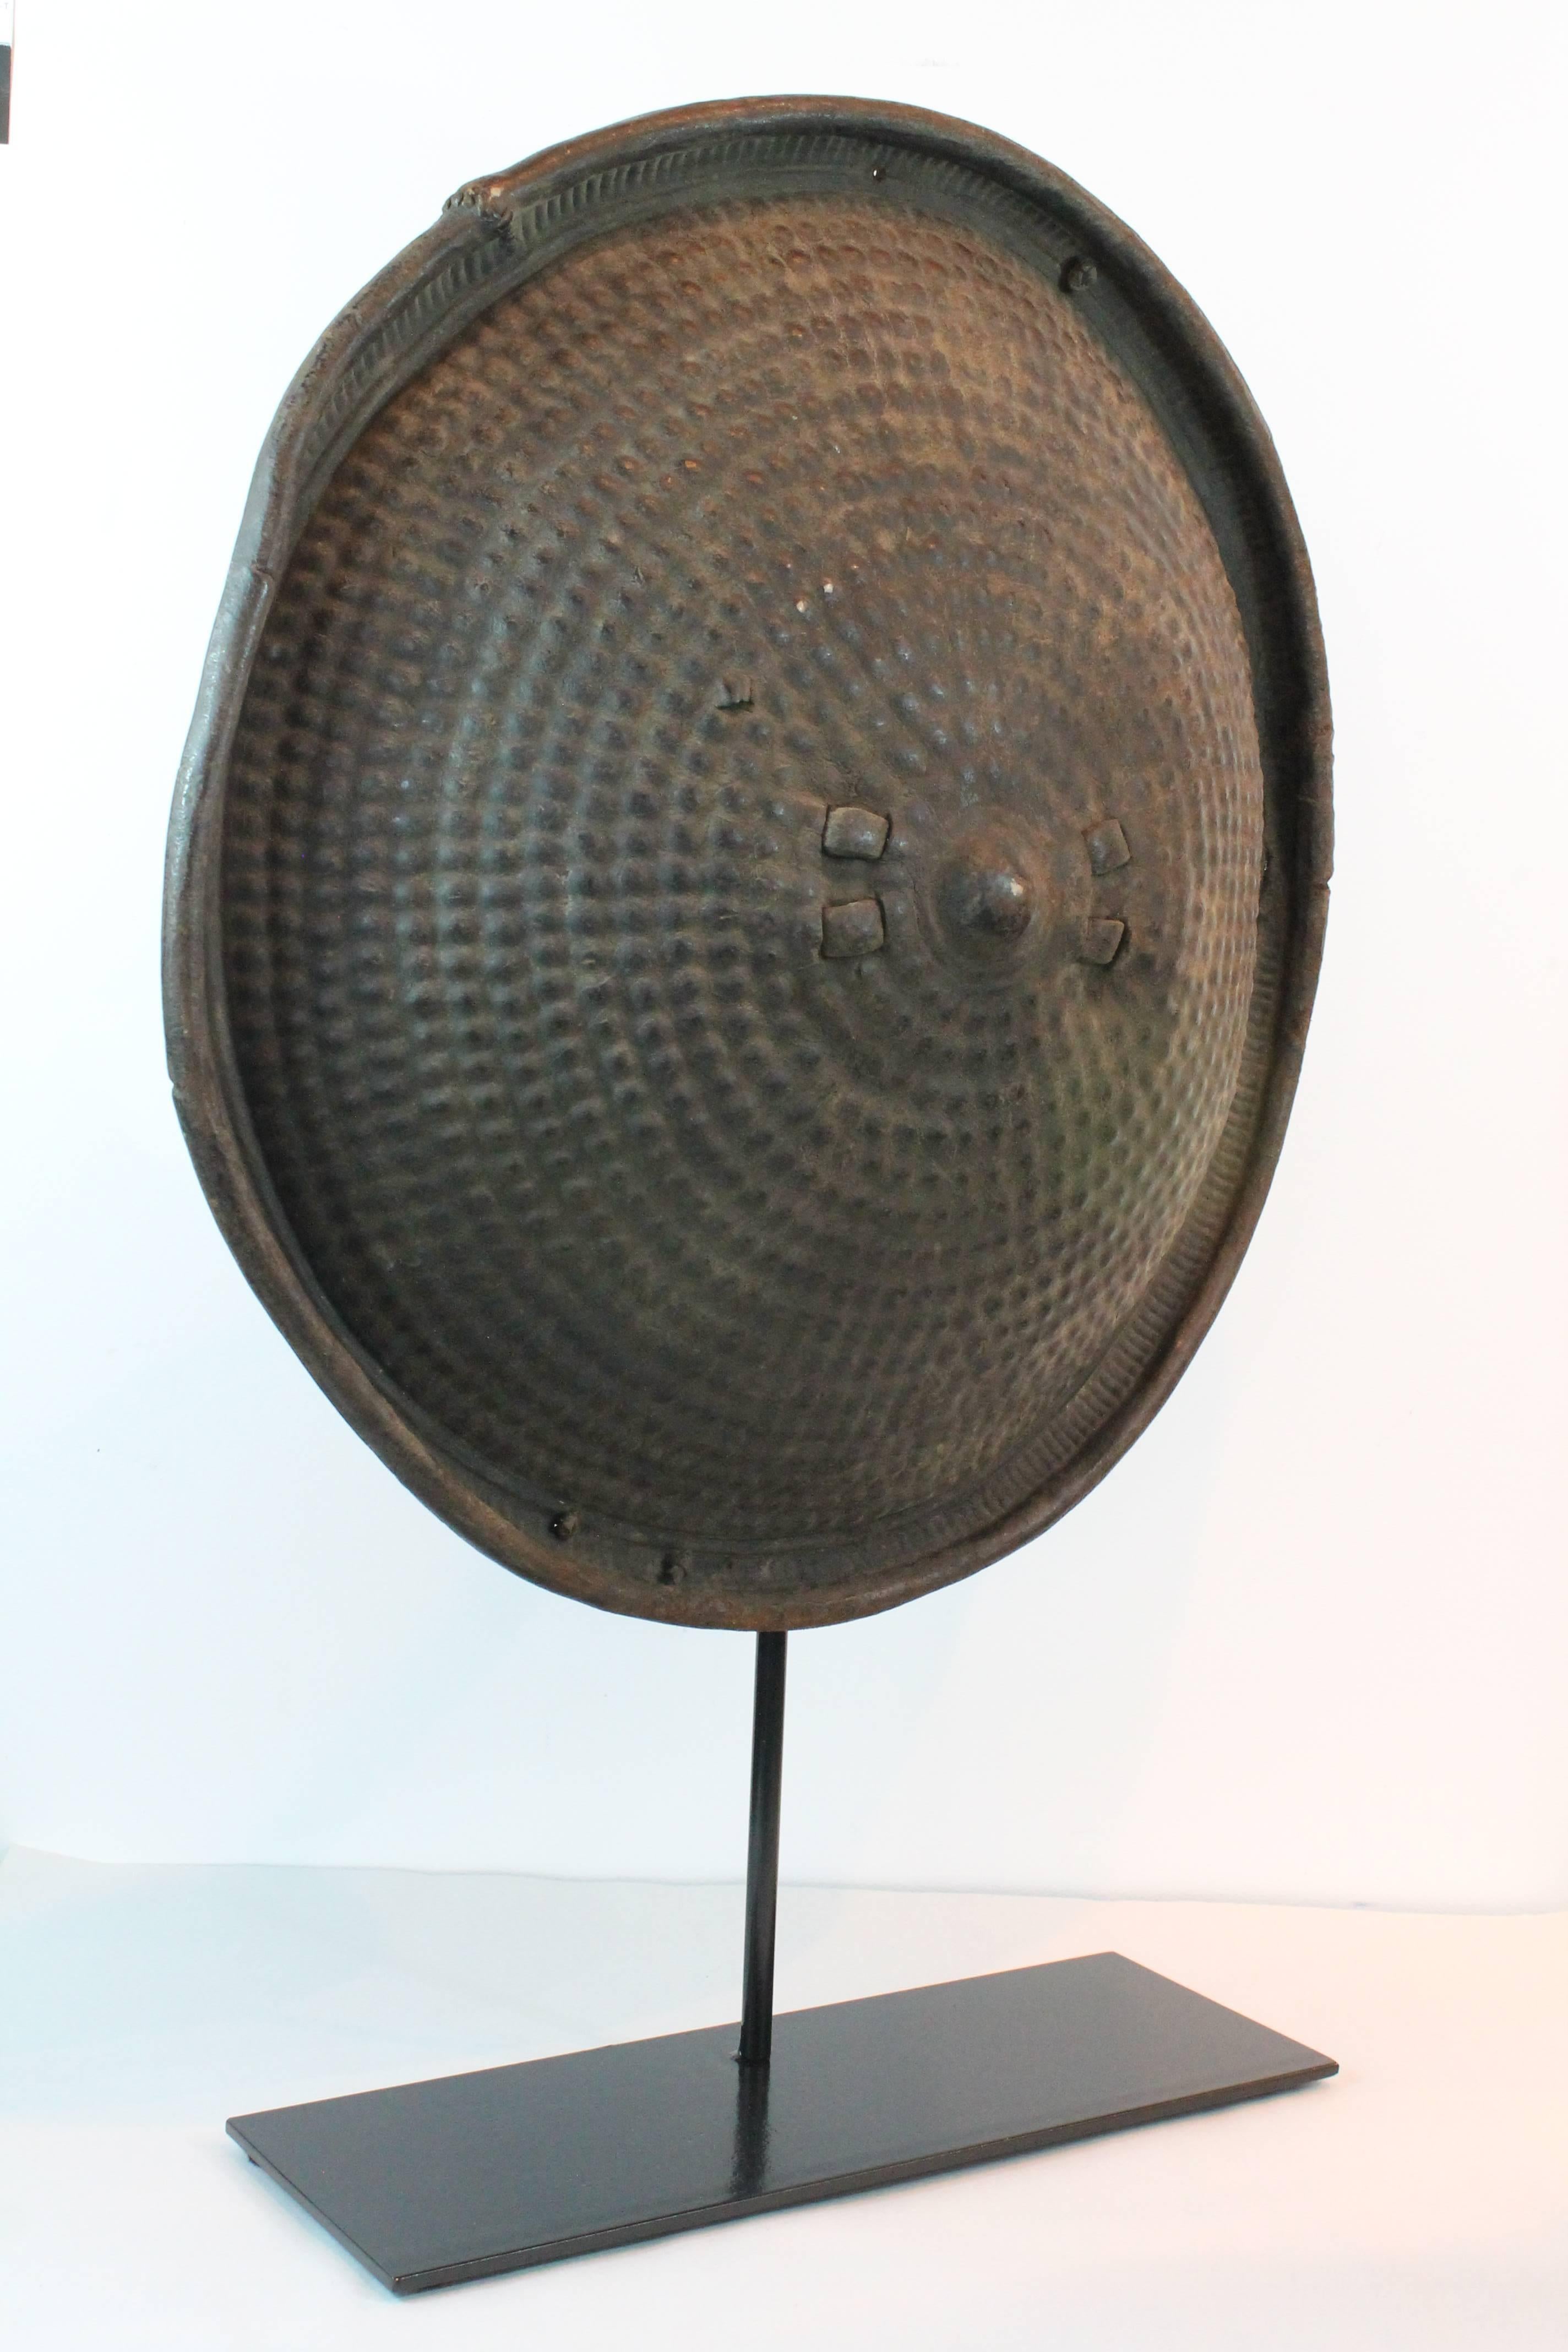 Graphic dimensional thick rhinoceros hide shield from Ethiopia on a custom iron stand.
Fantastic concentric circle design.